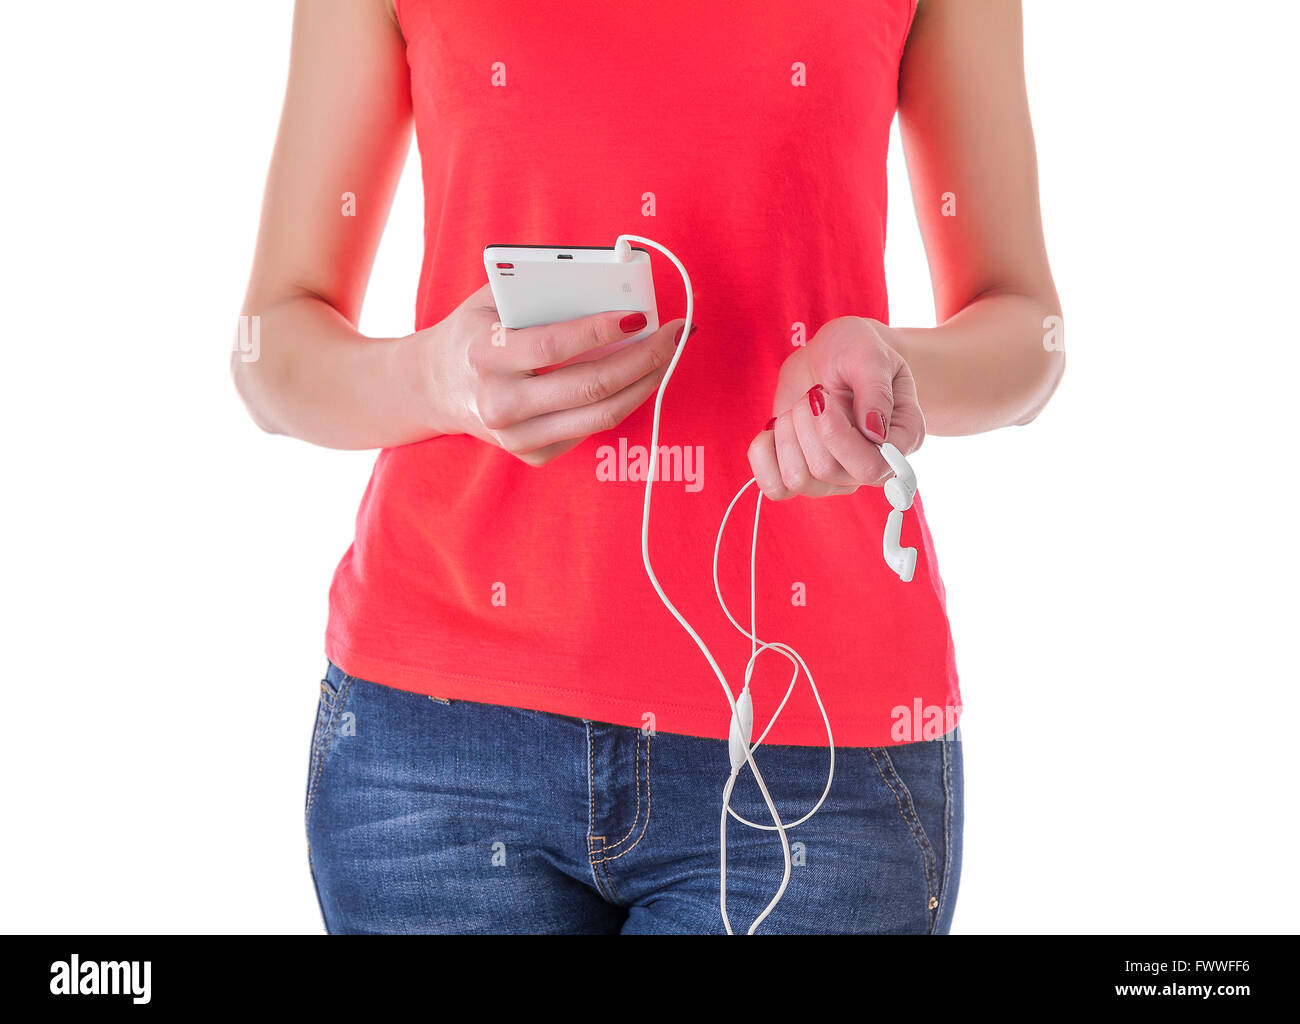 Girl listening to music in your phone. Silhouette on a white background. Stock Photo